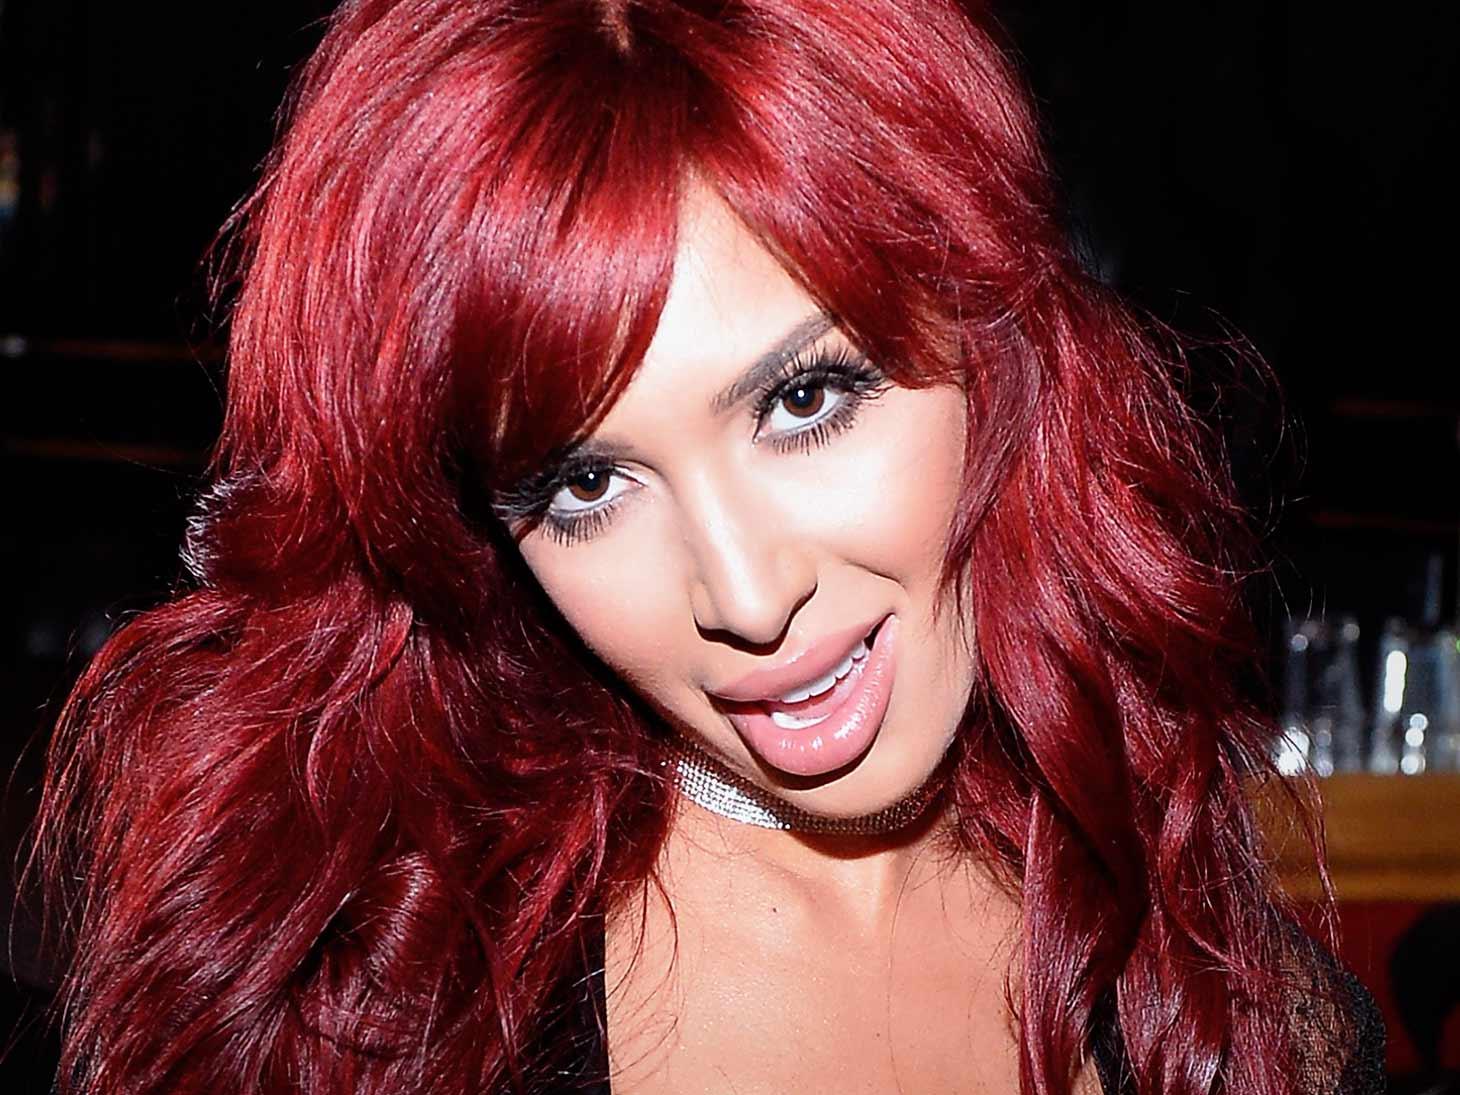 Farrah Abraham Will Be Sued for Millions If She Bails On Boxing Match, Promoters Claim They Met All Demands